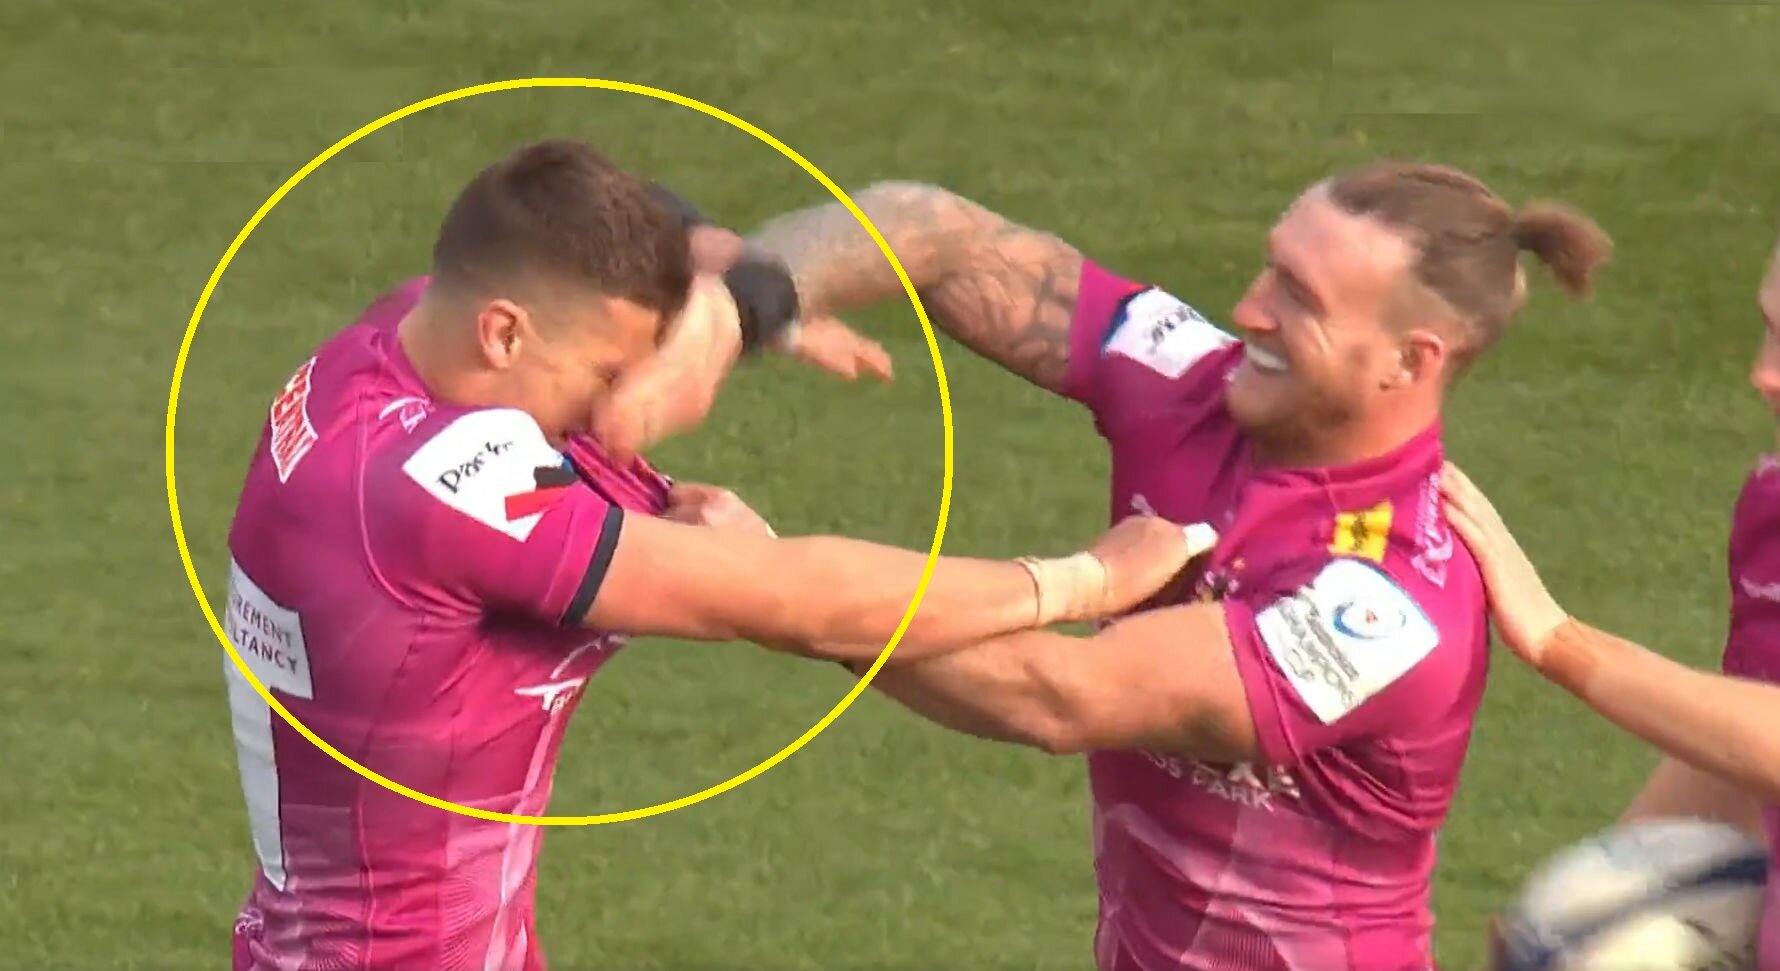 Hogg could be cited for tussle with Slade in bizarre off the ball incident